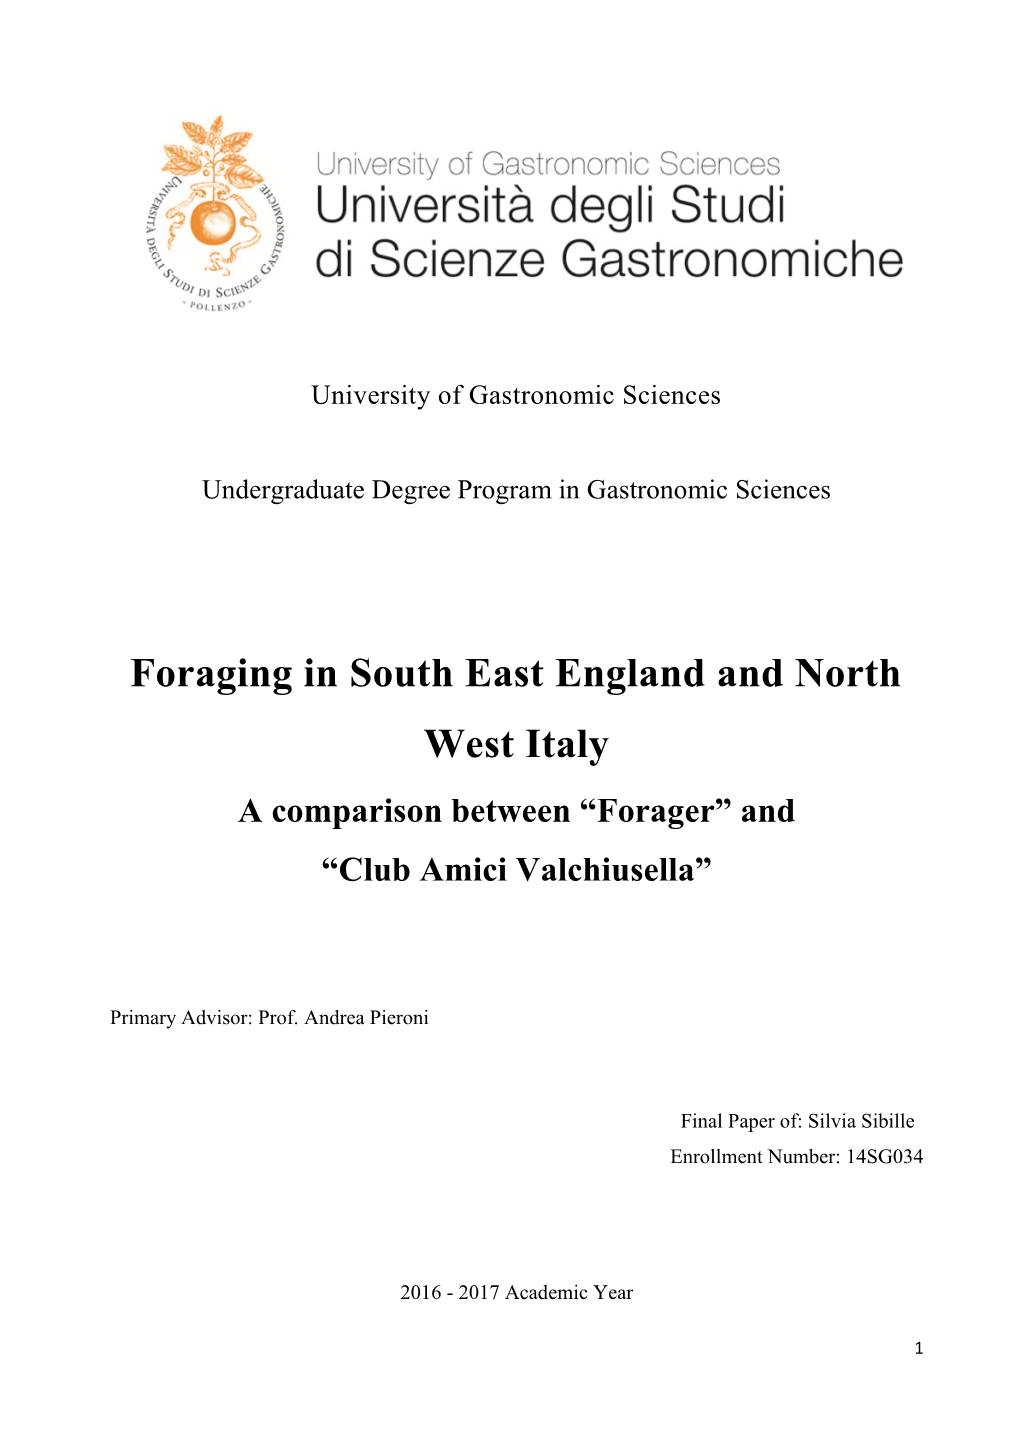 Foraging in South East England and North West Italy a Comparison Between “Forager” and “Club Amici Valchiusella”